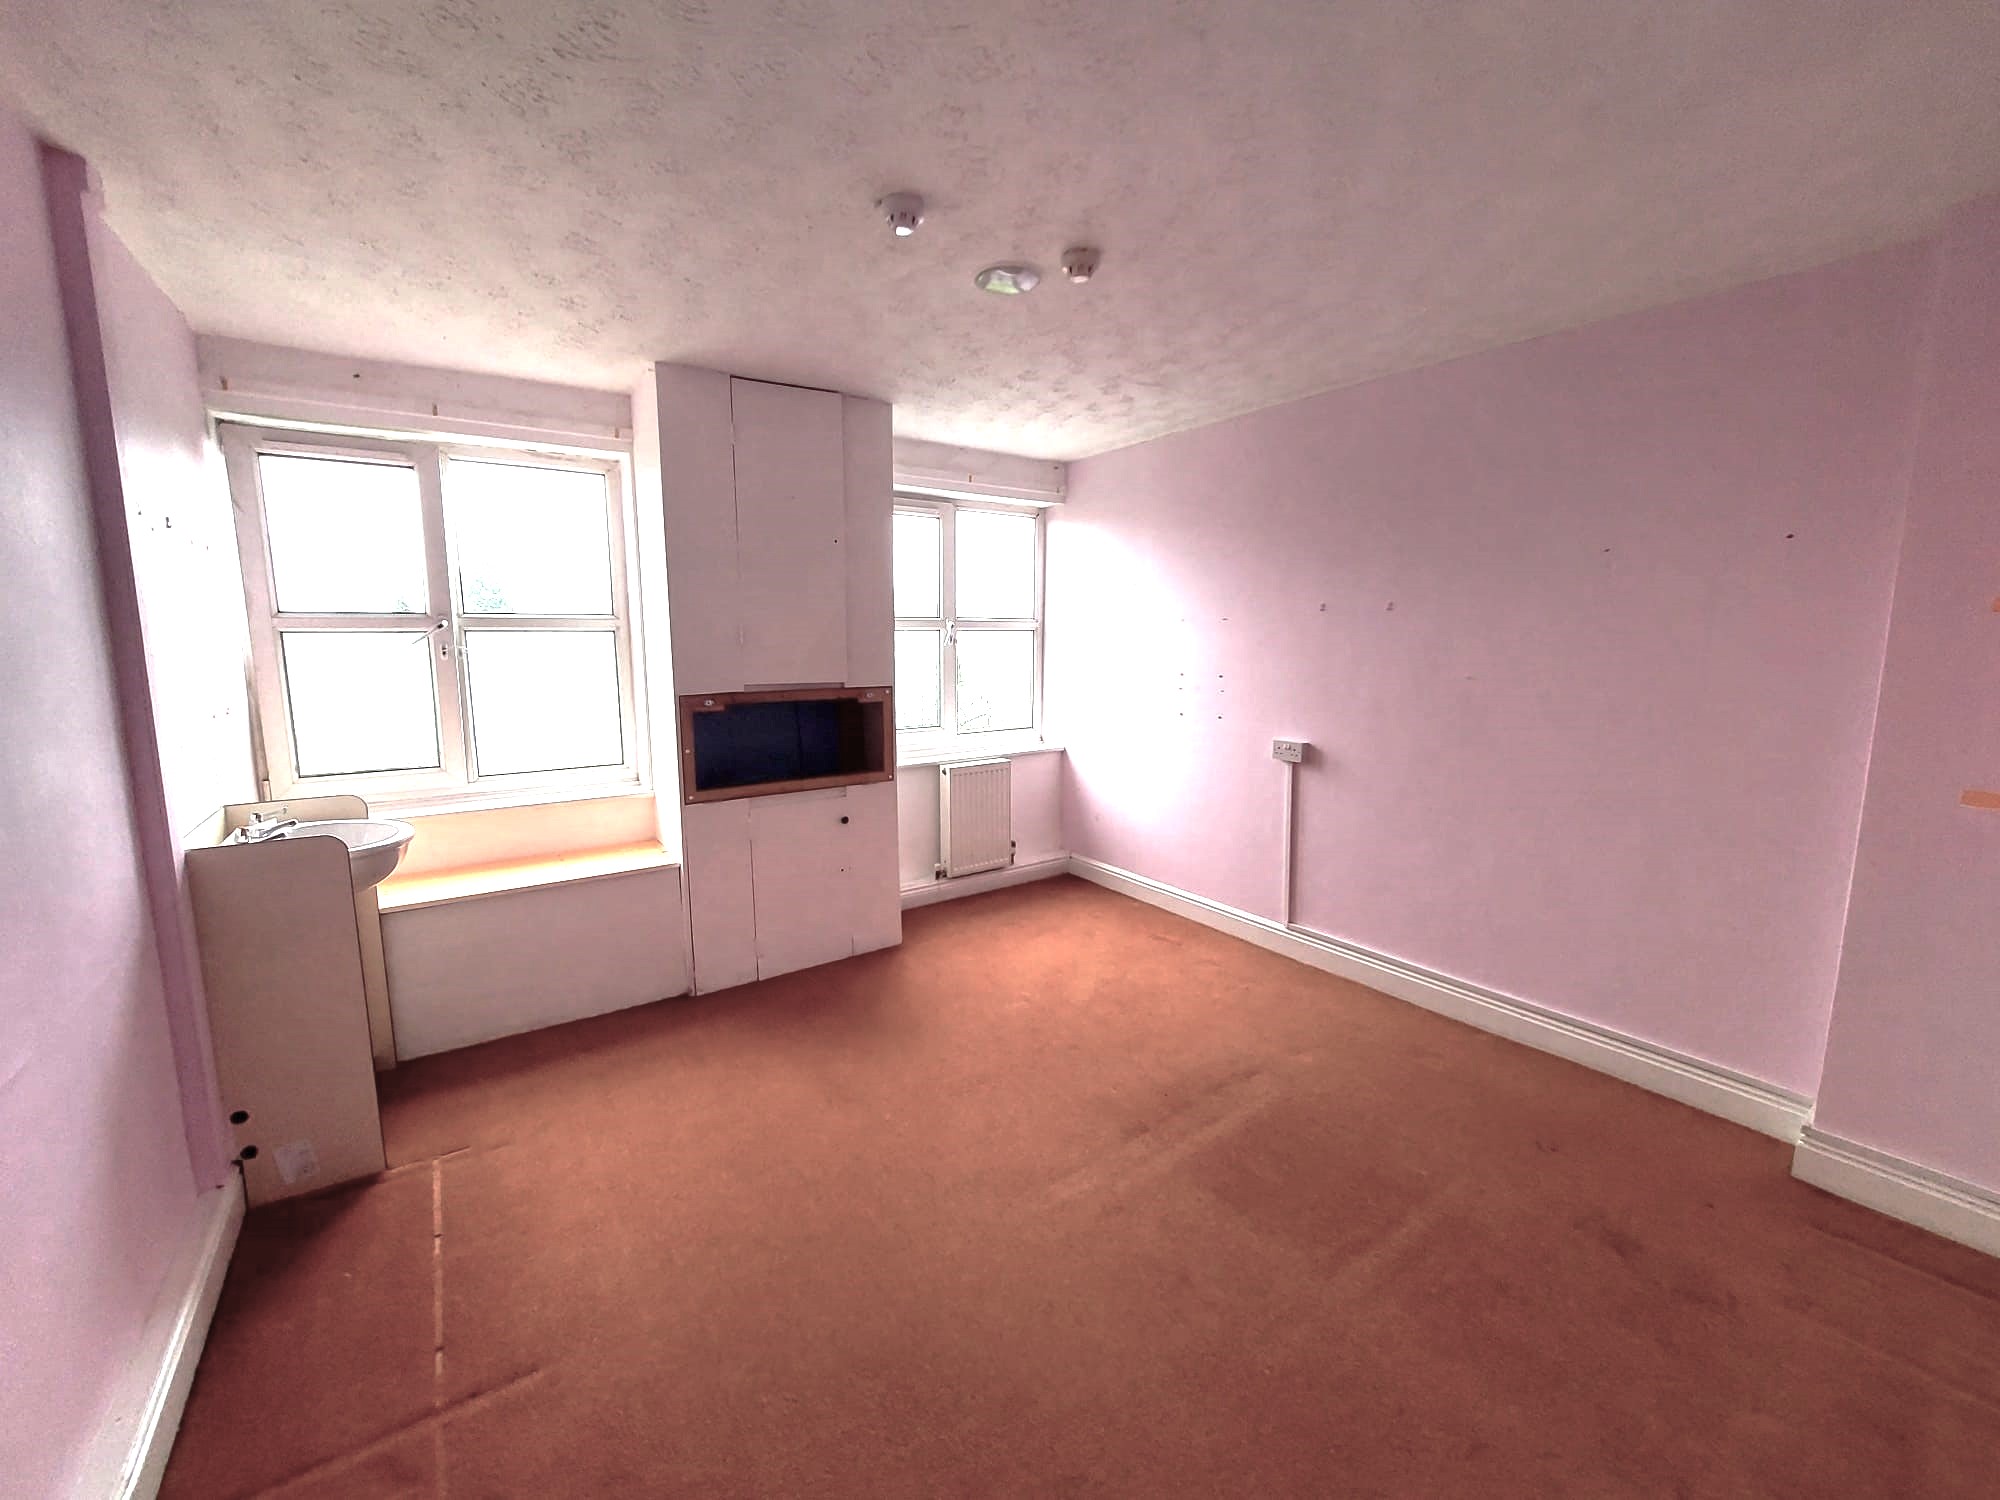 Spacious house share in great location from £400 inc bills